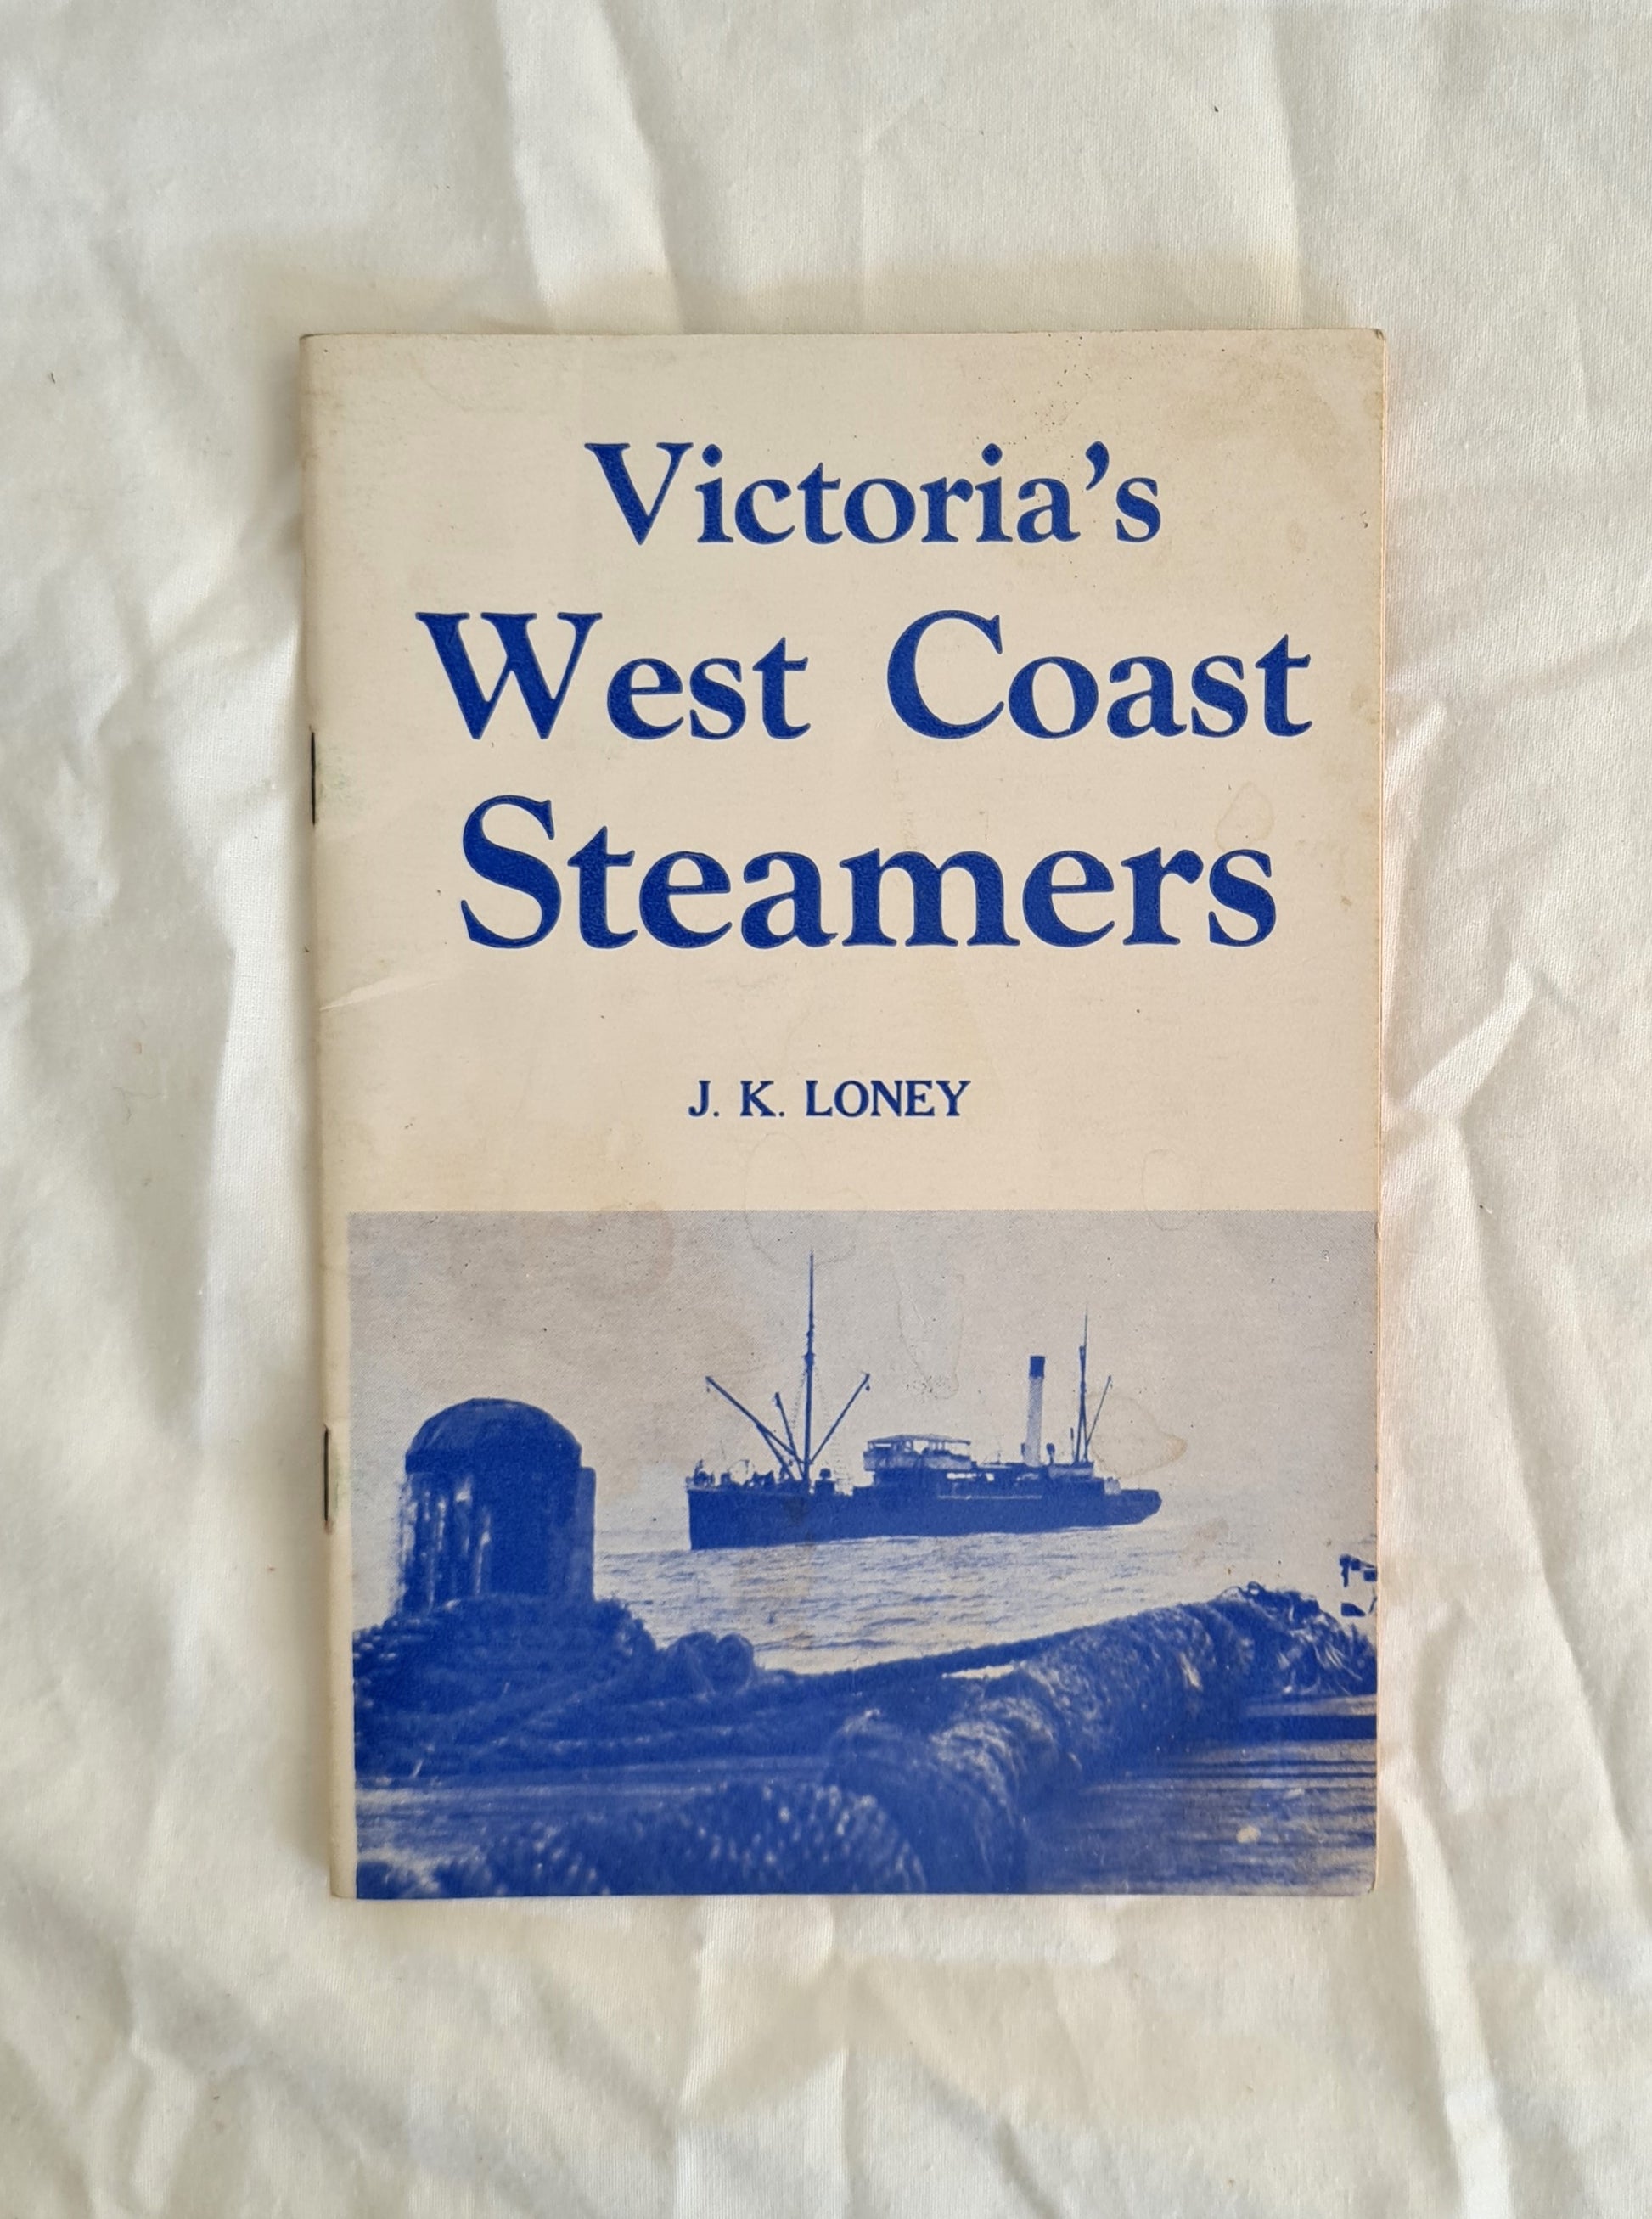 Victoria’s West Coast Steamers  by J. K. Loney